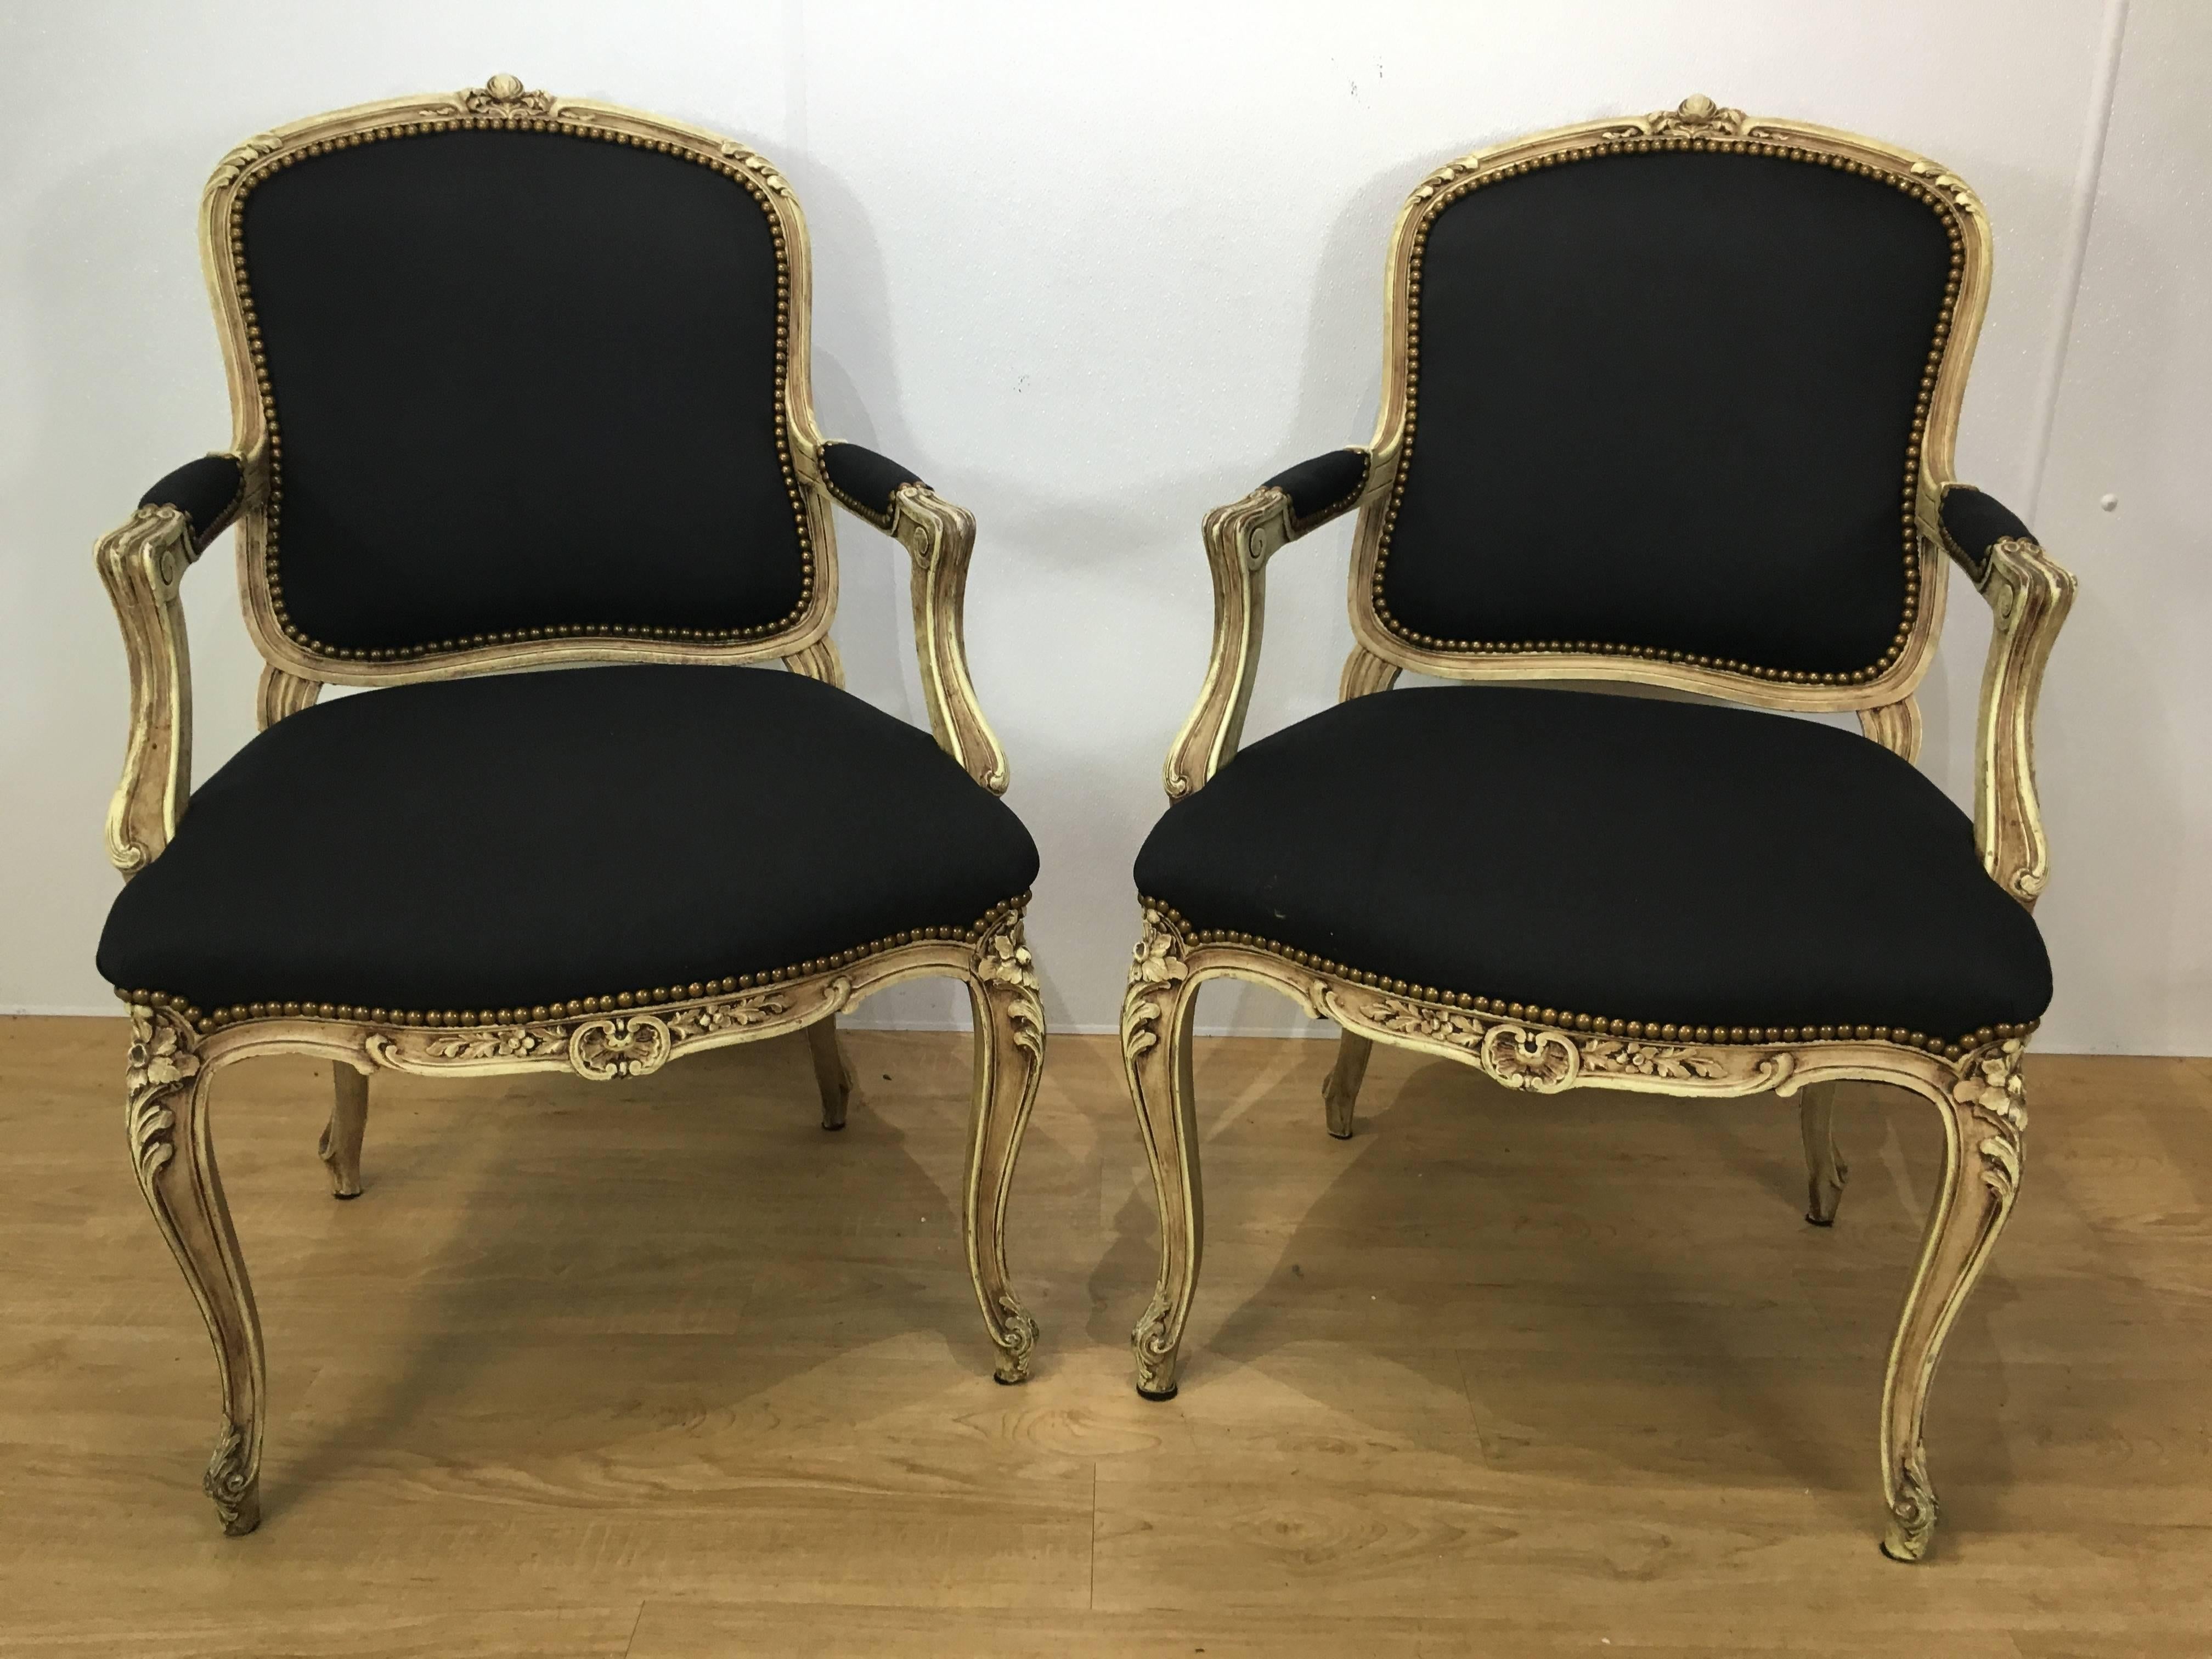 Pair of style Louis XVI armchairs or fauteuils each one finely carved cream painted frames with new upholstery.